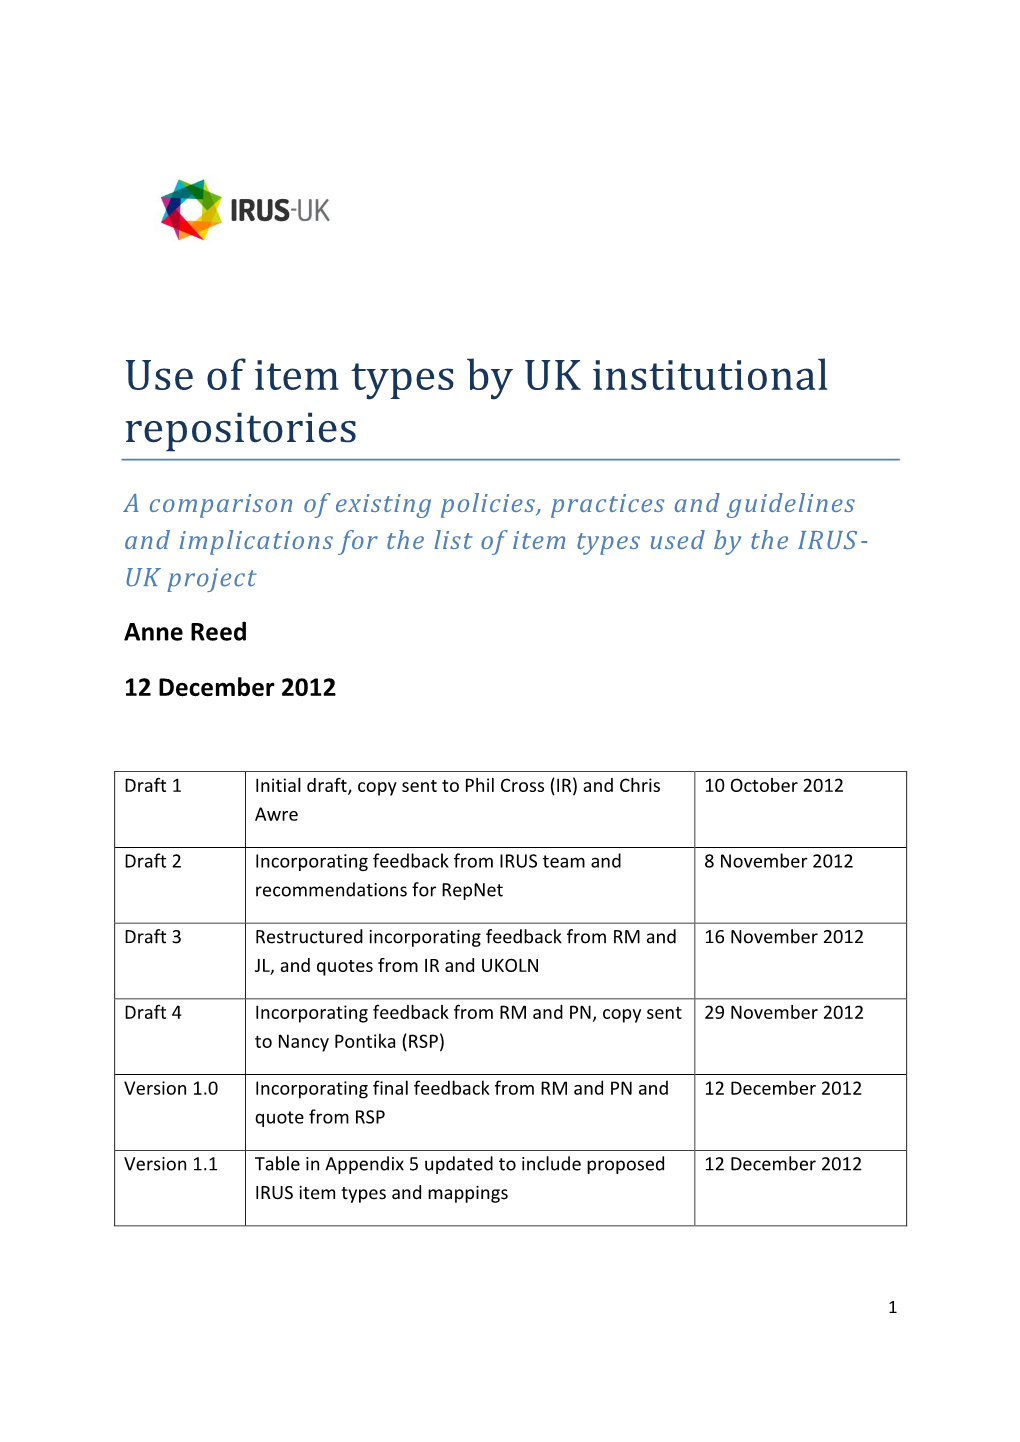 Use of Item Types by UK Institutional Repositories